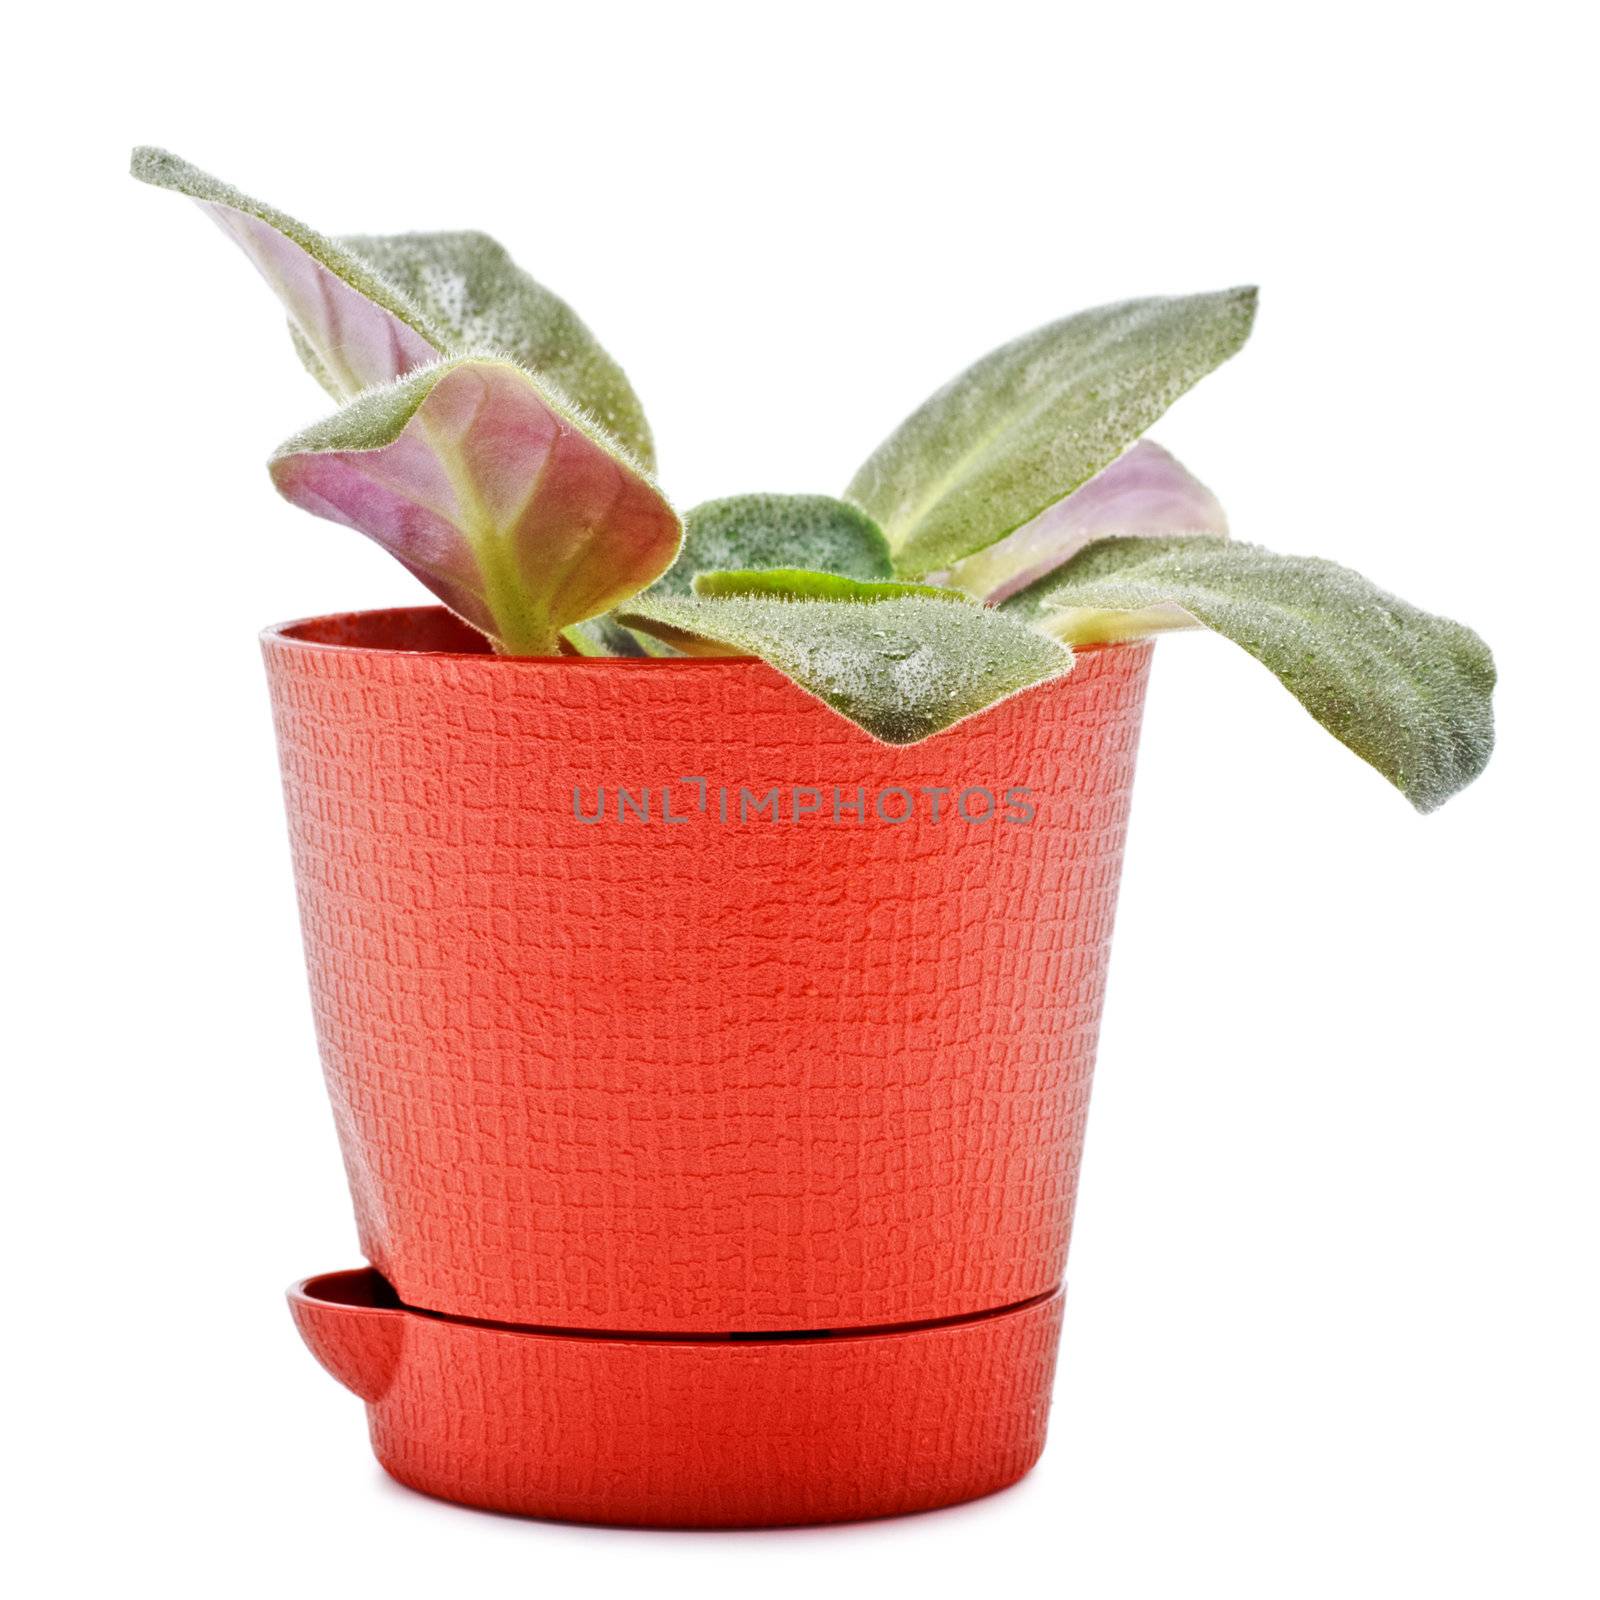 home plant in pot isolated on white